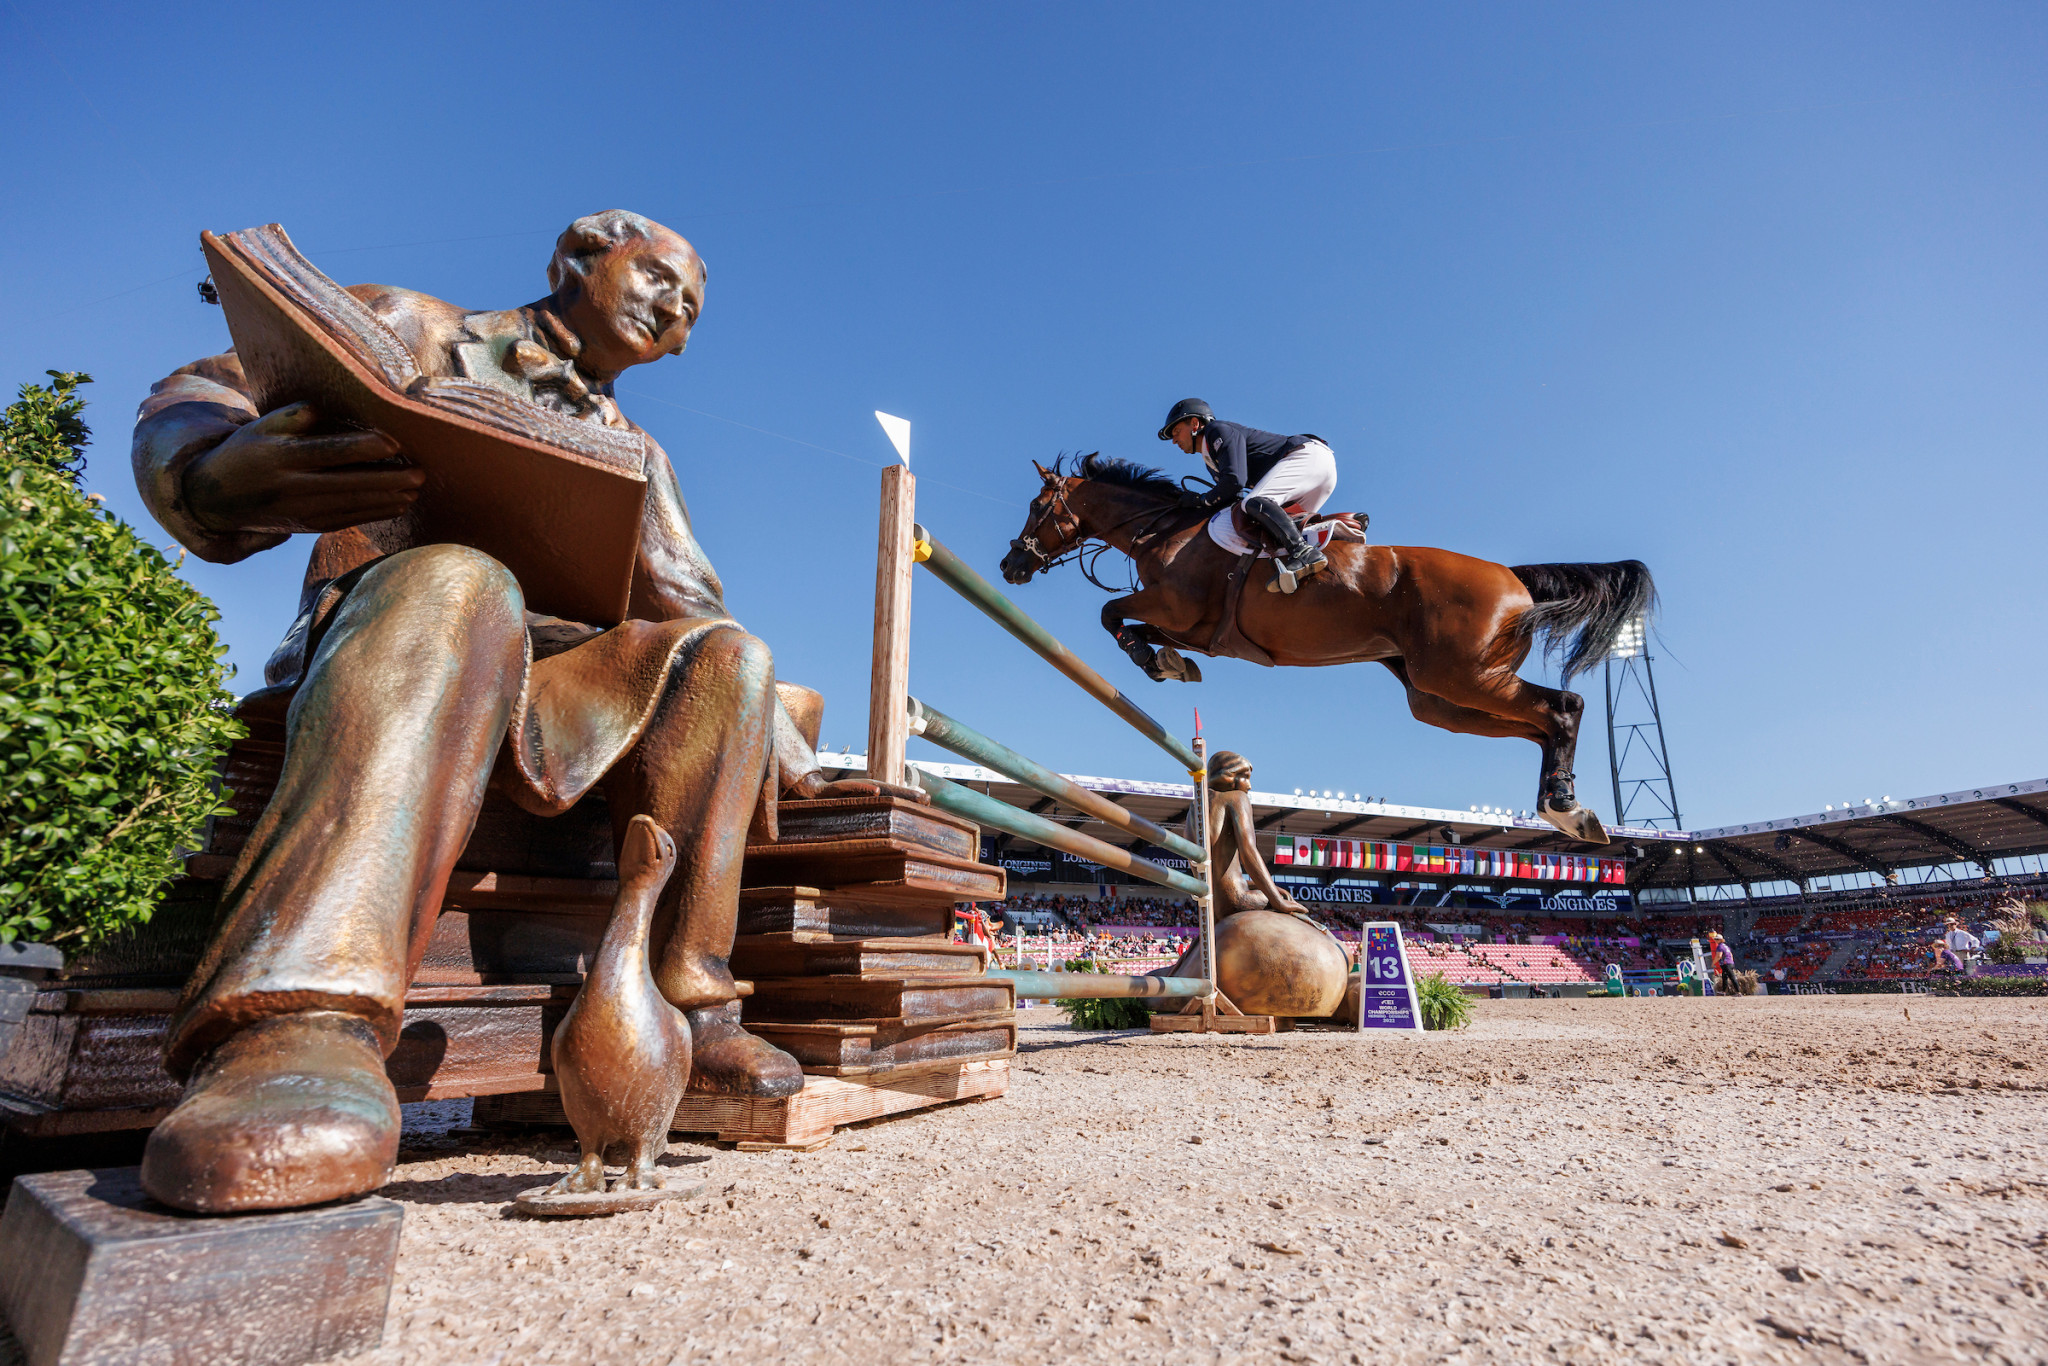 Julien Epaillard and Caracole de la Roque maintained complete fluidity to hold onto top spot in the individual jumping ©Herning2022/Stefan Lafrentz